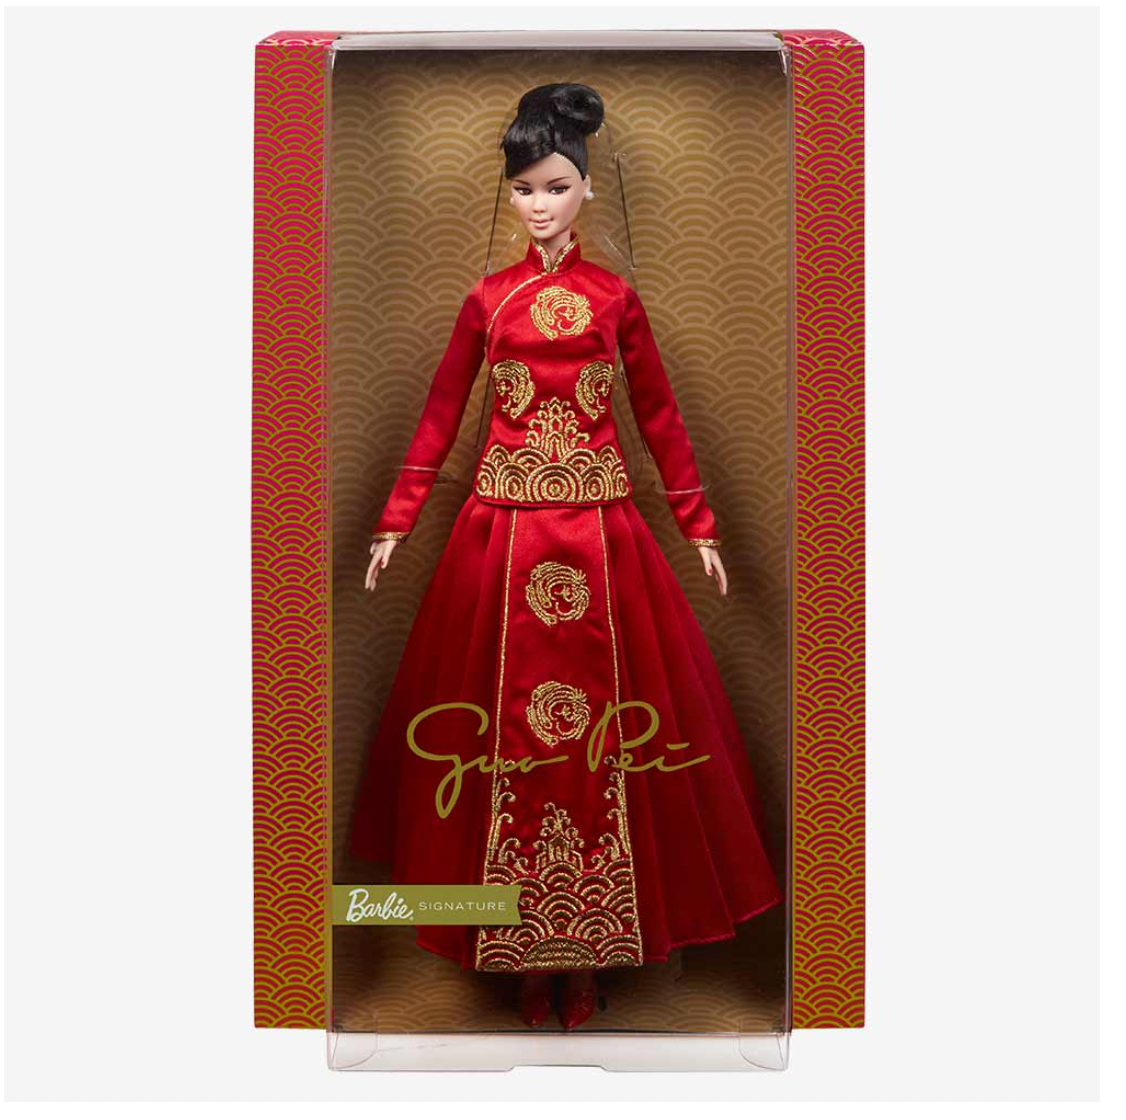 Barbie Signature Chinese Lunar New Year 2022 By Guo Pei Doll New with Box